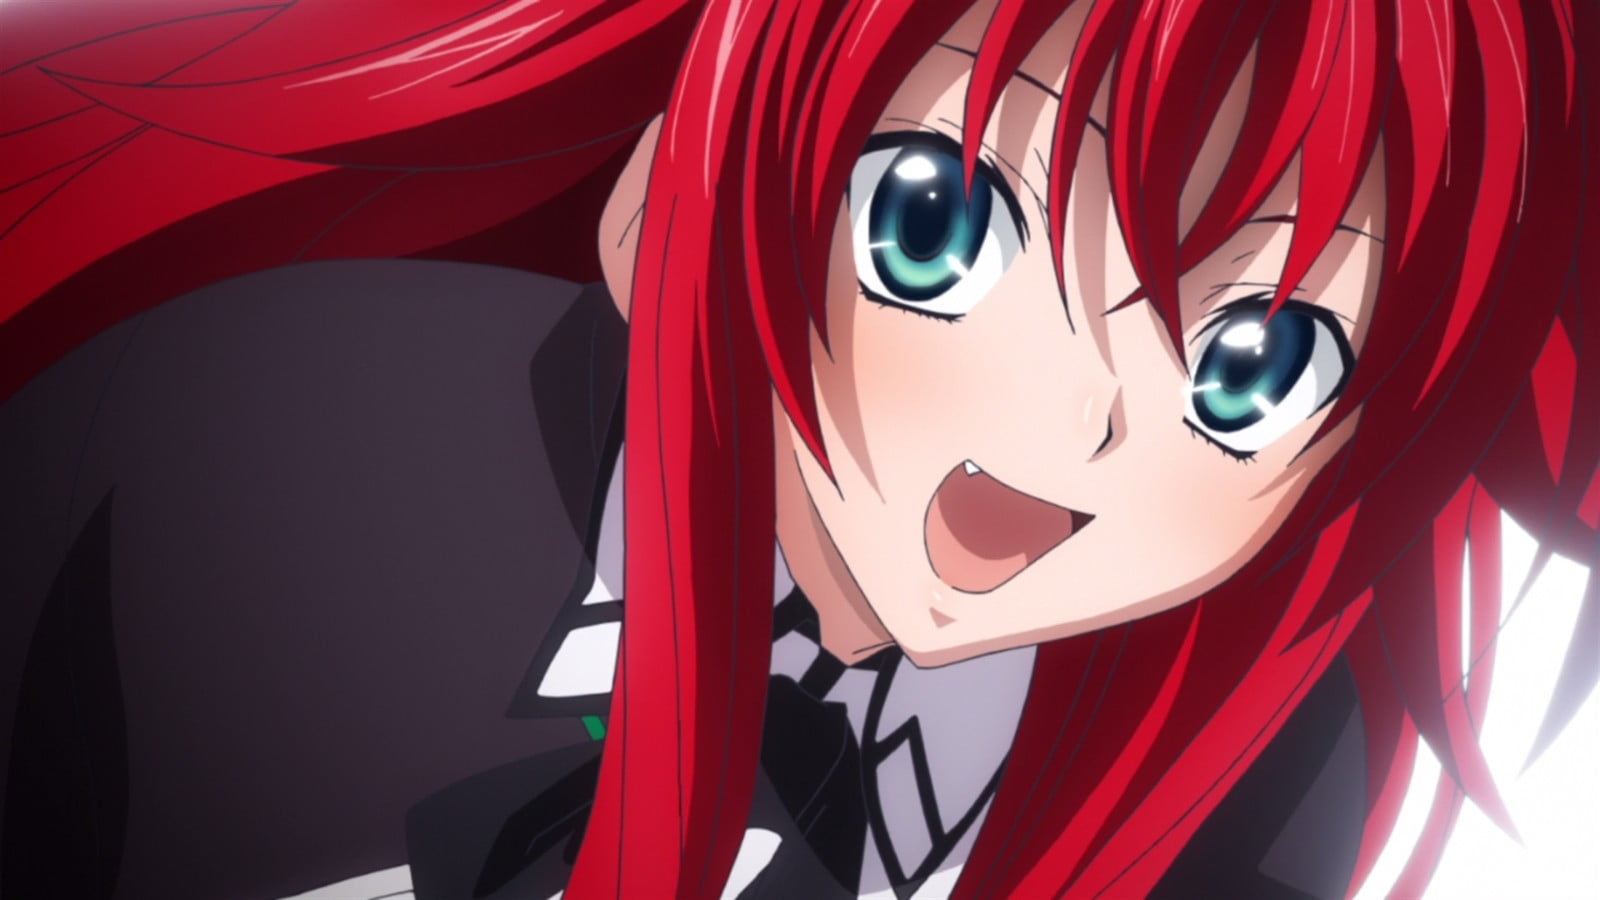 anime, anime girls, Gremory Rias, Highschool DxD, red, no people